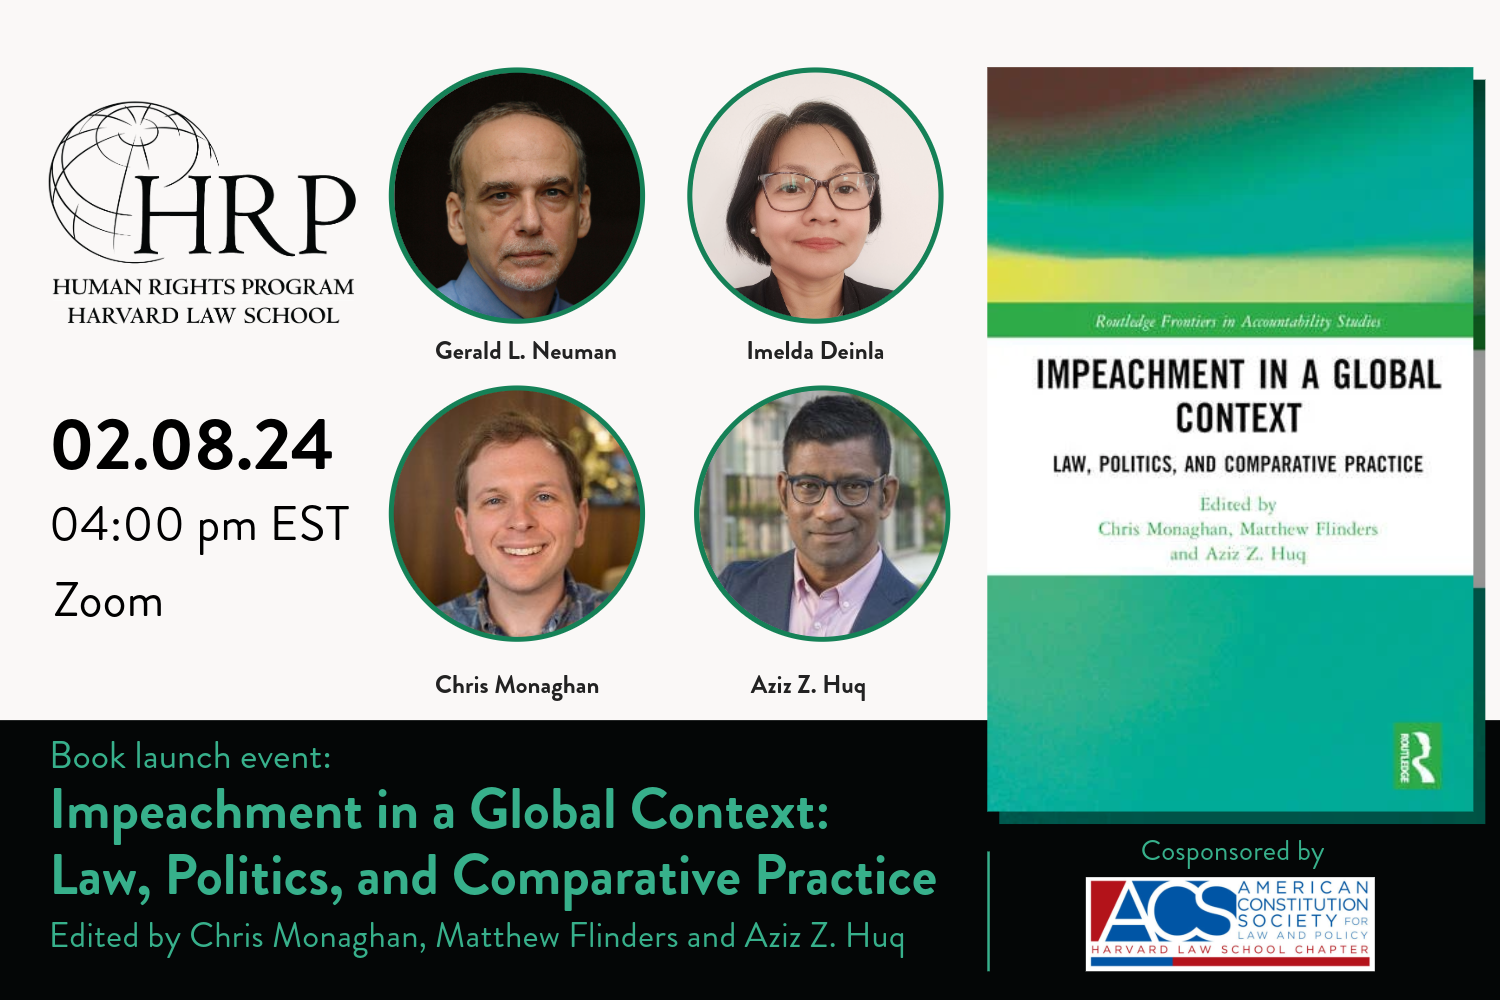 Event banner of virtual book launch of “Impeachment in a Global Context: Law, Politics, and Comparative Practice” on February 8 at 4 pm EST. Register on the HRP website.